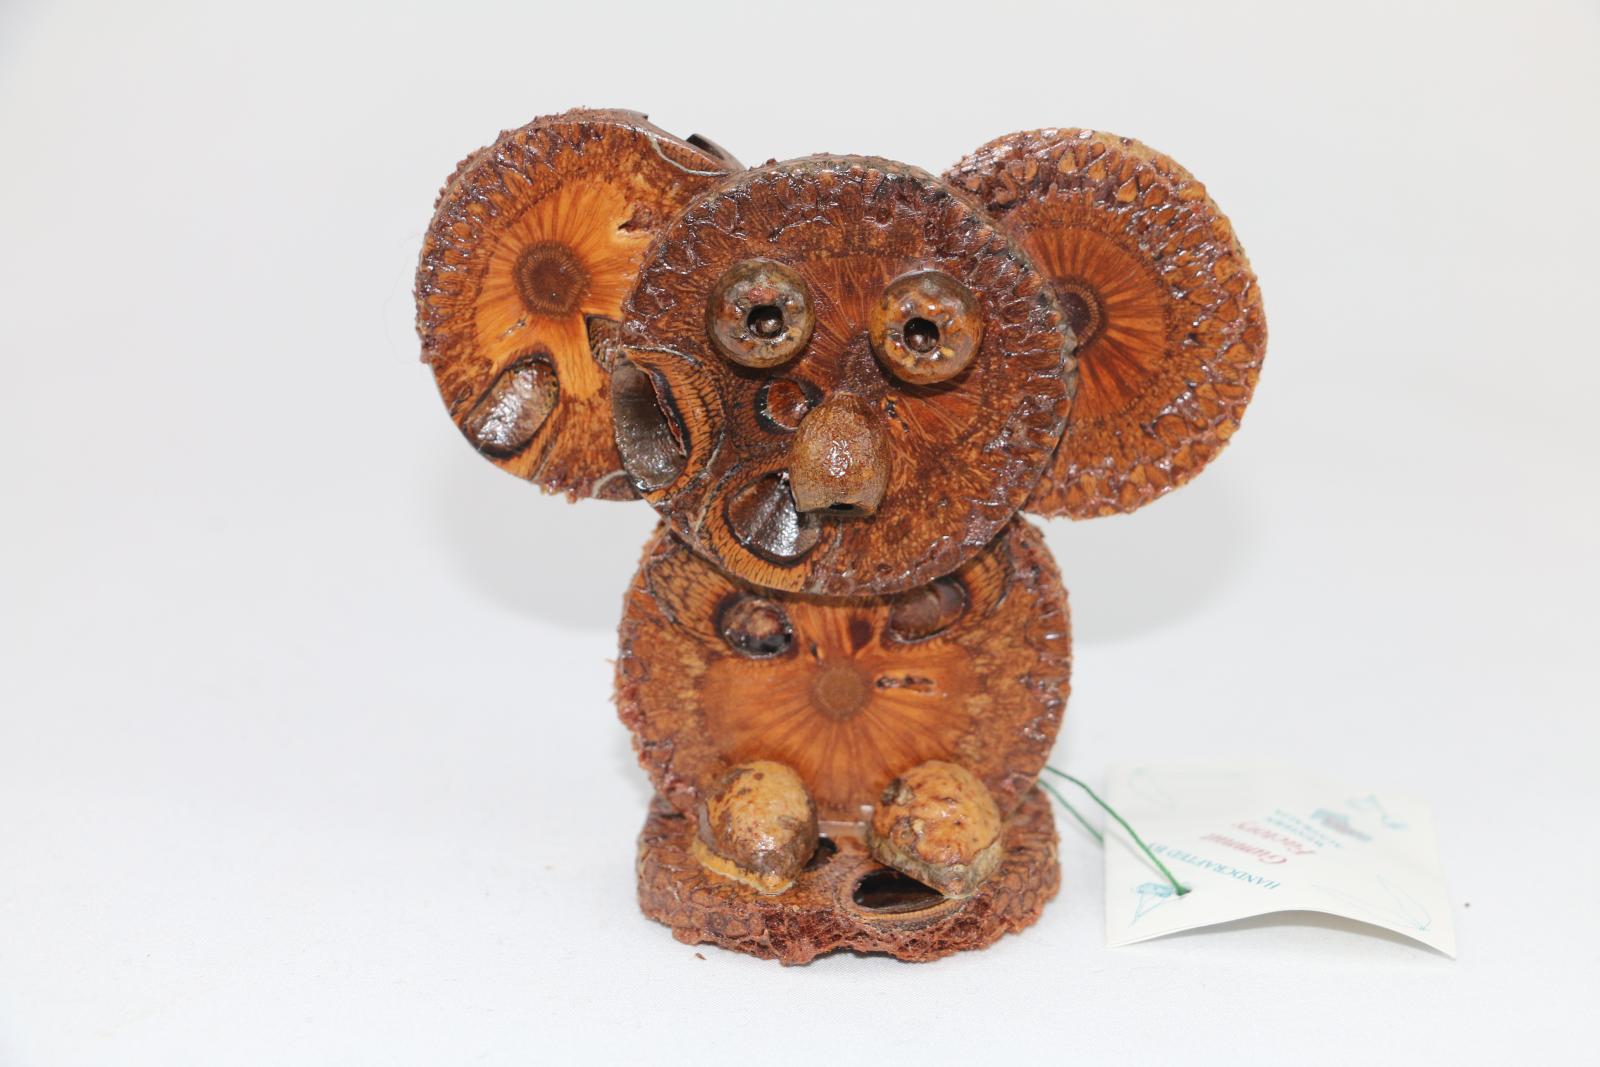 Nut styled Koala glued together with cross-cut sections of banksia in shape of a Koala with seed pods for nose and eyes and feet. A gum nut is located at back of figurine. The object is clear-varnished. Label attached to figurine with cord.